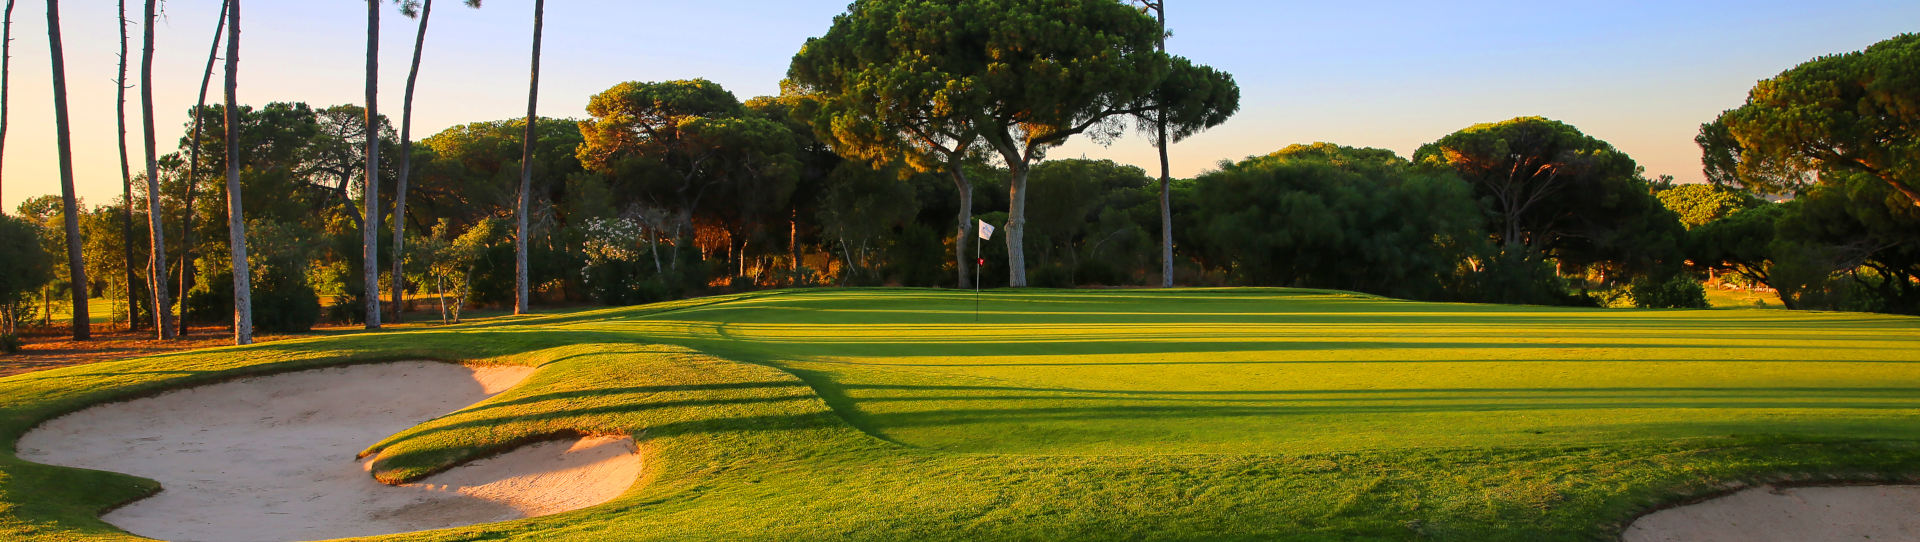 Portugal golf holidays - Vilamoura Tailor-made Collection - Photo 1